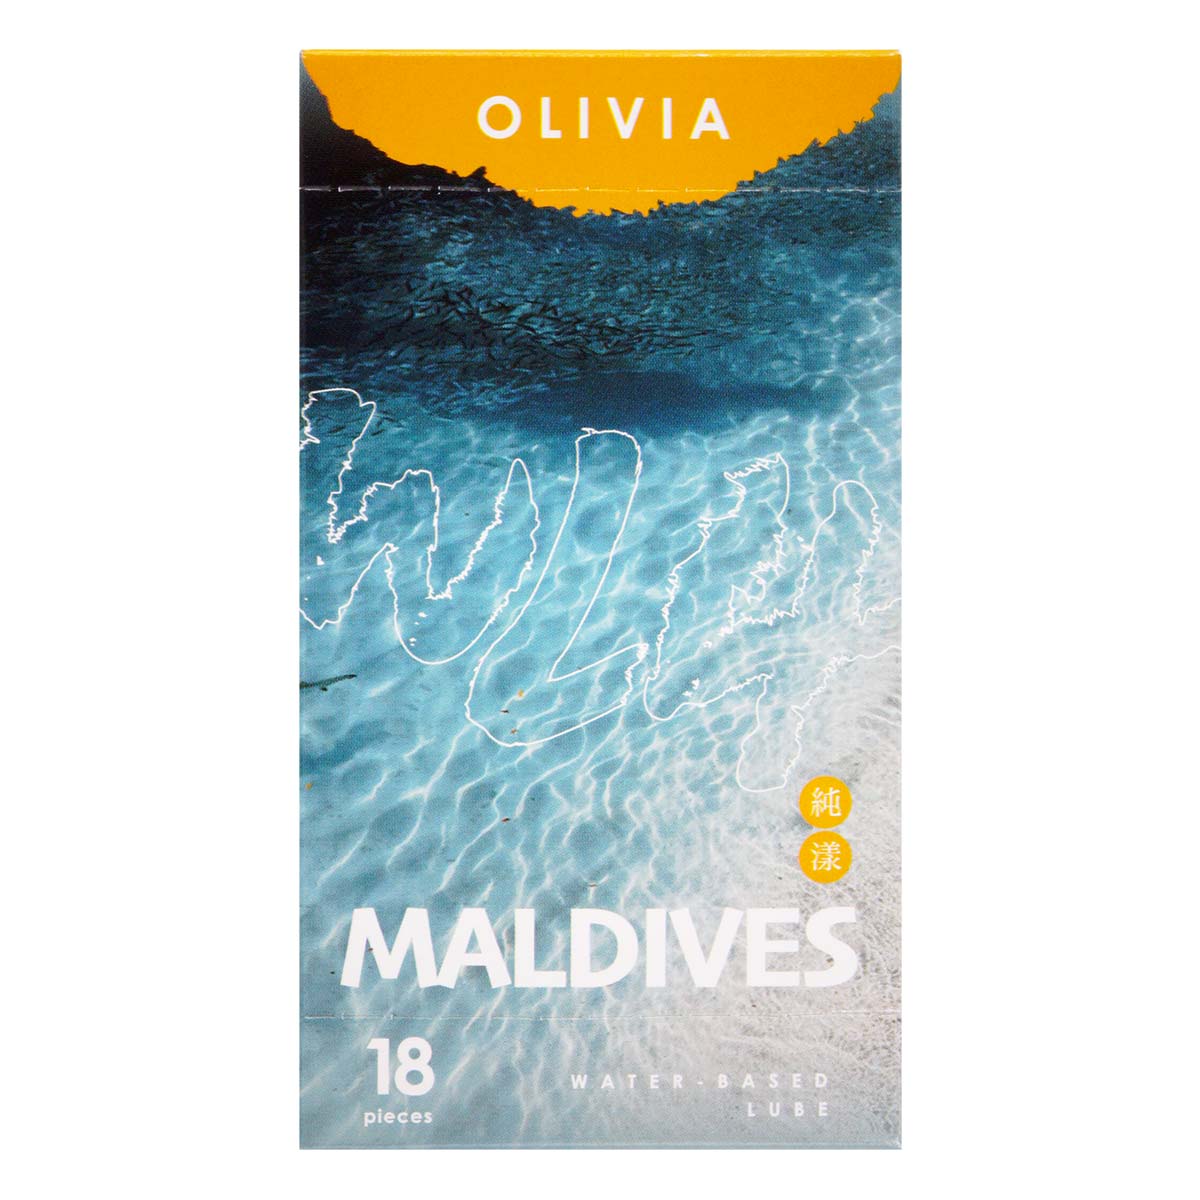 Olivia Maldives Hydro 4g (sachet) 18 pieces Water-based Lubricant-p_2